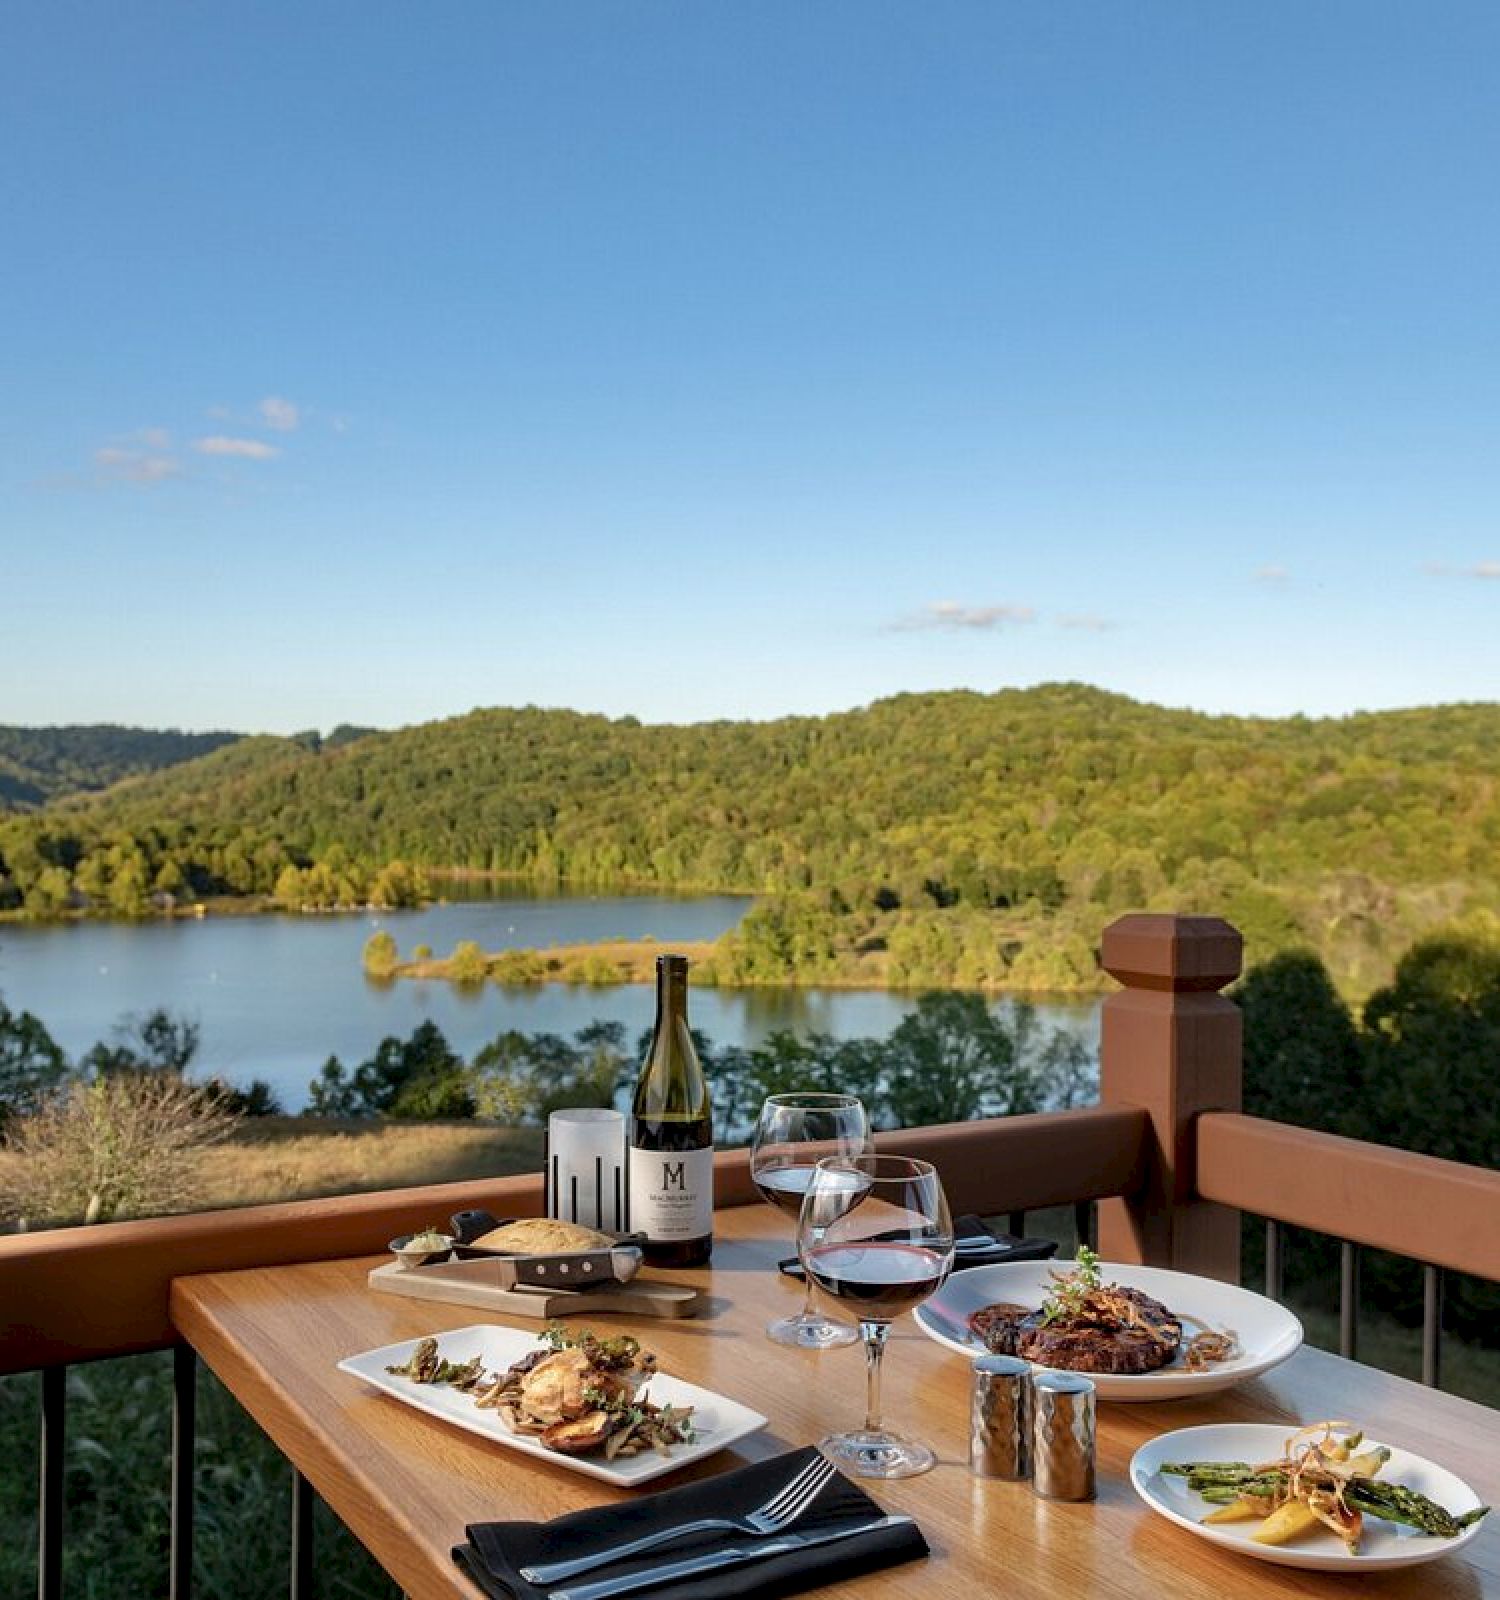 A table set with a meal and wine on a deck overlooking a scenic lake and forested hills under a clear blue sky.